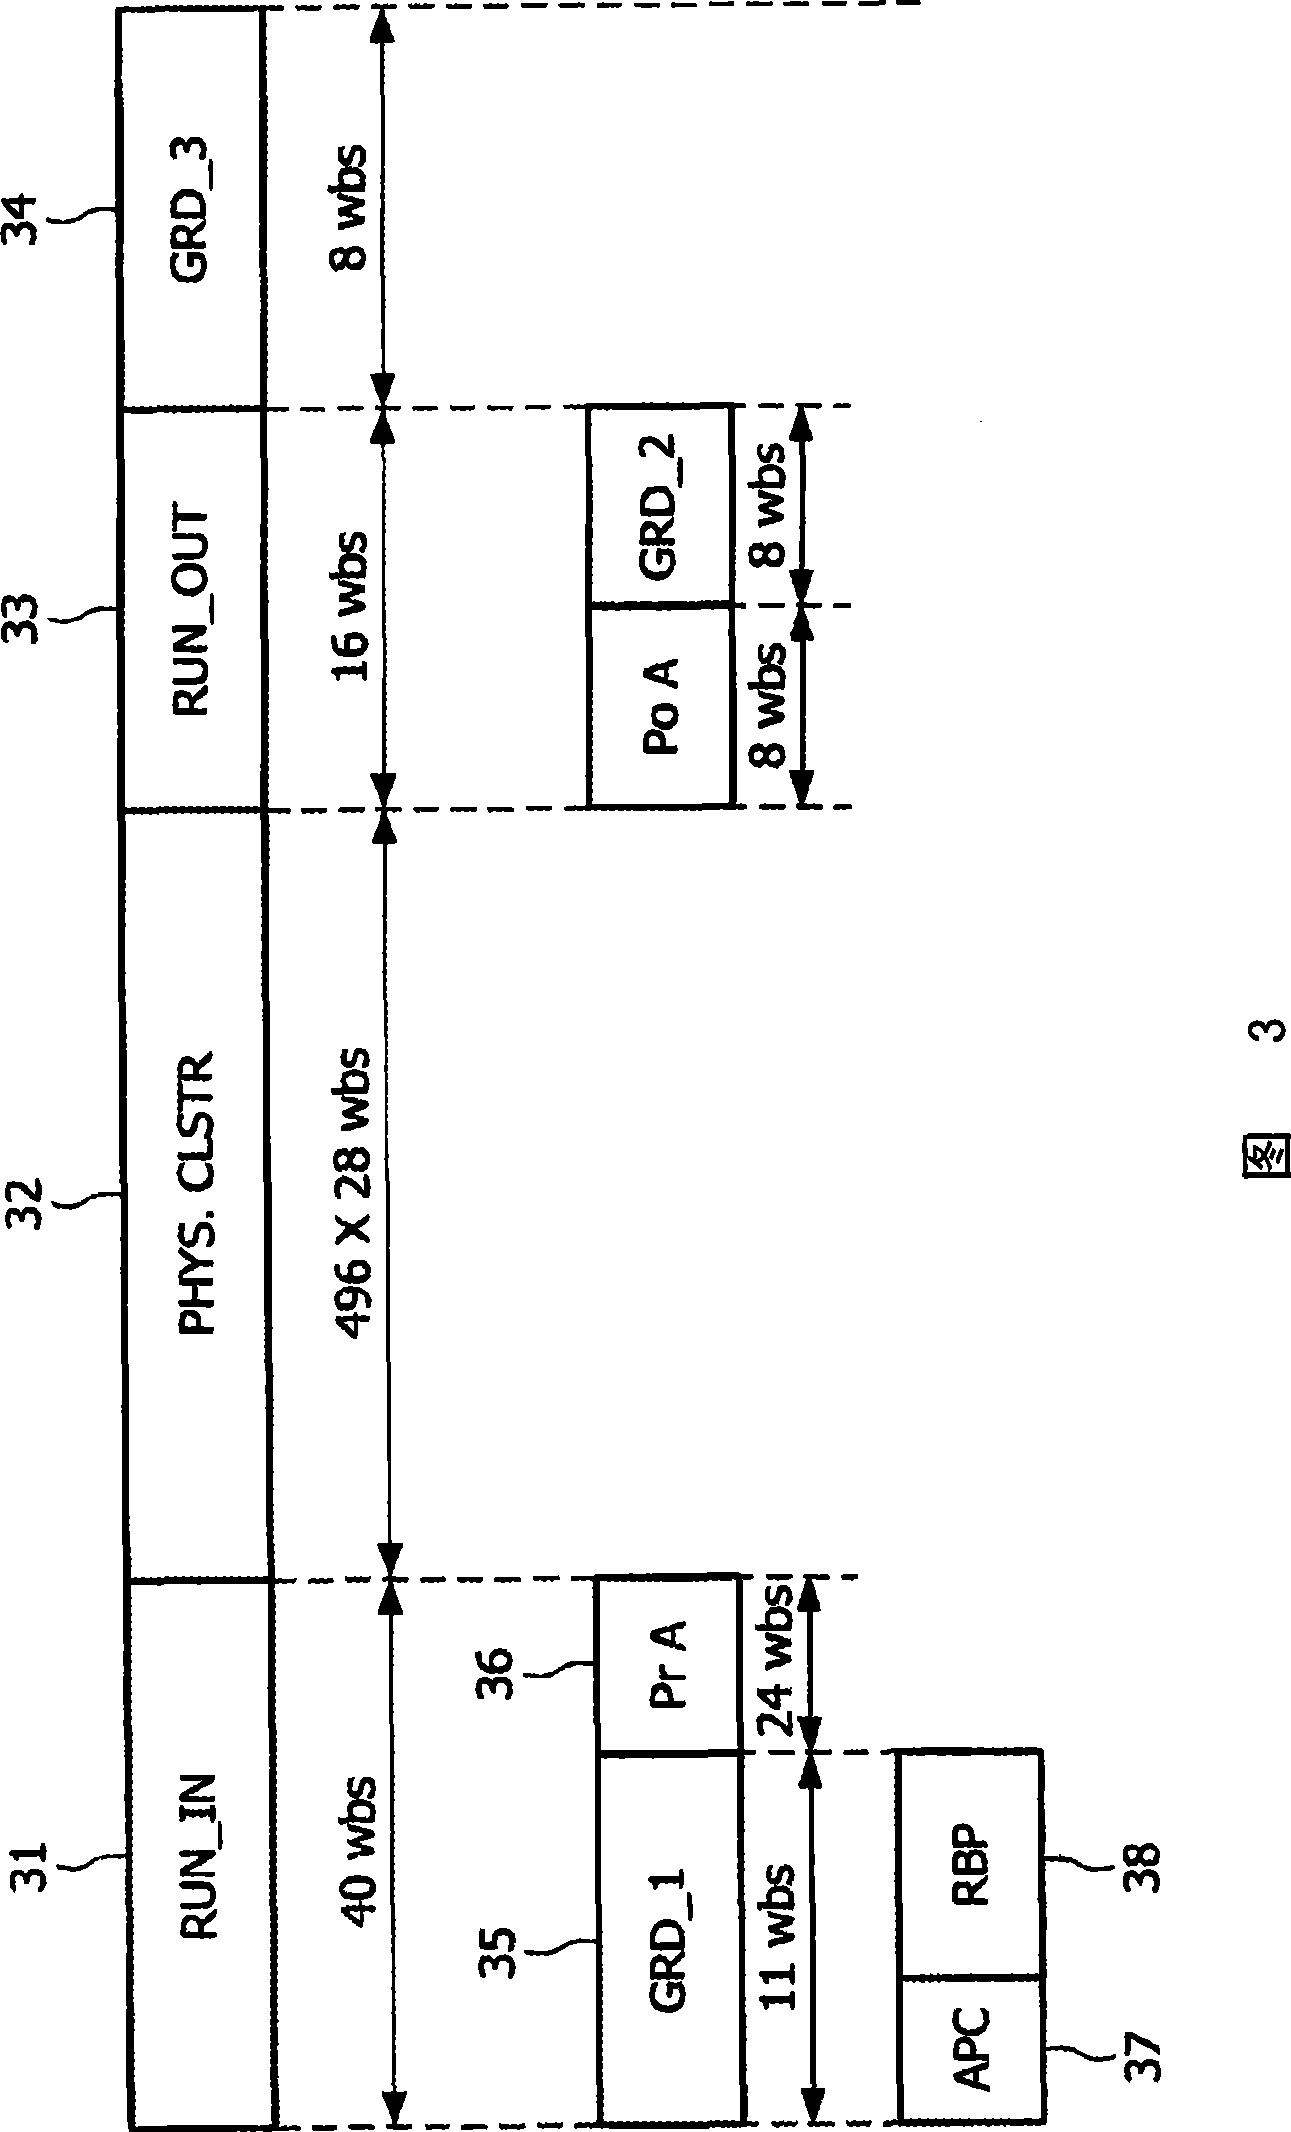 Method and apparatus for recording data onto an optical disc